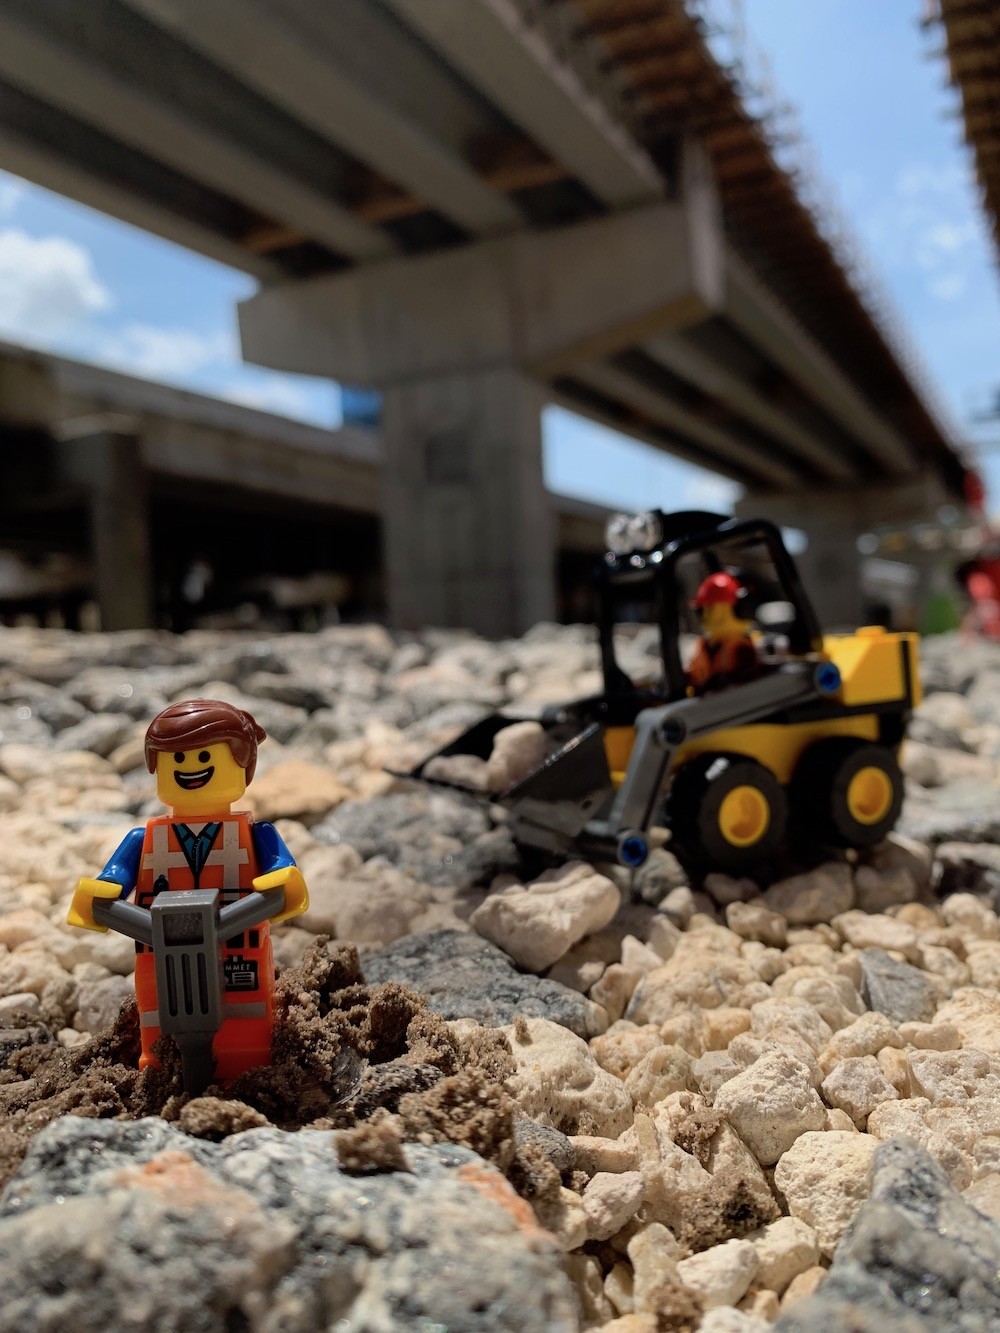 Meet Lego Explore Orlando, the dynamic duo of artists who make finding fun in your city look like a snap (2)